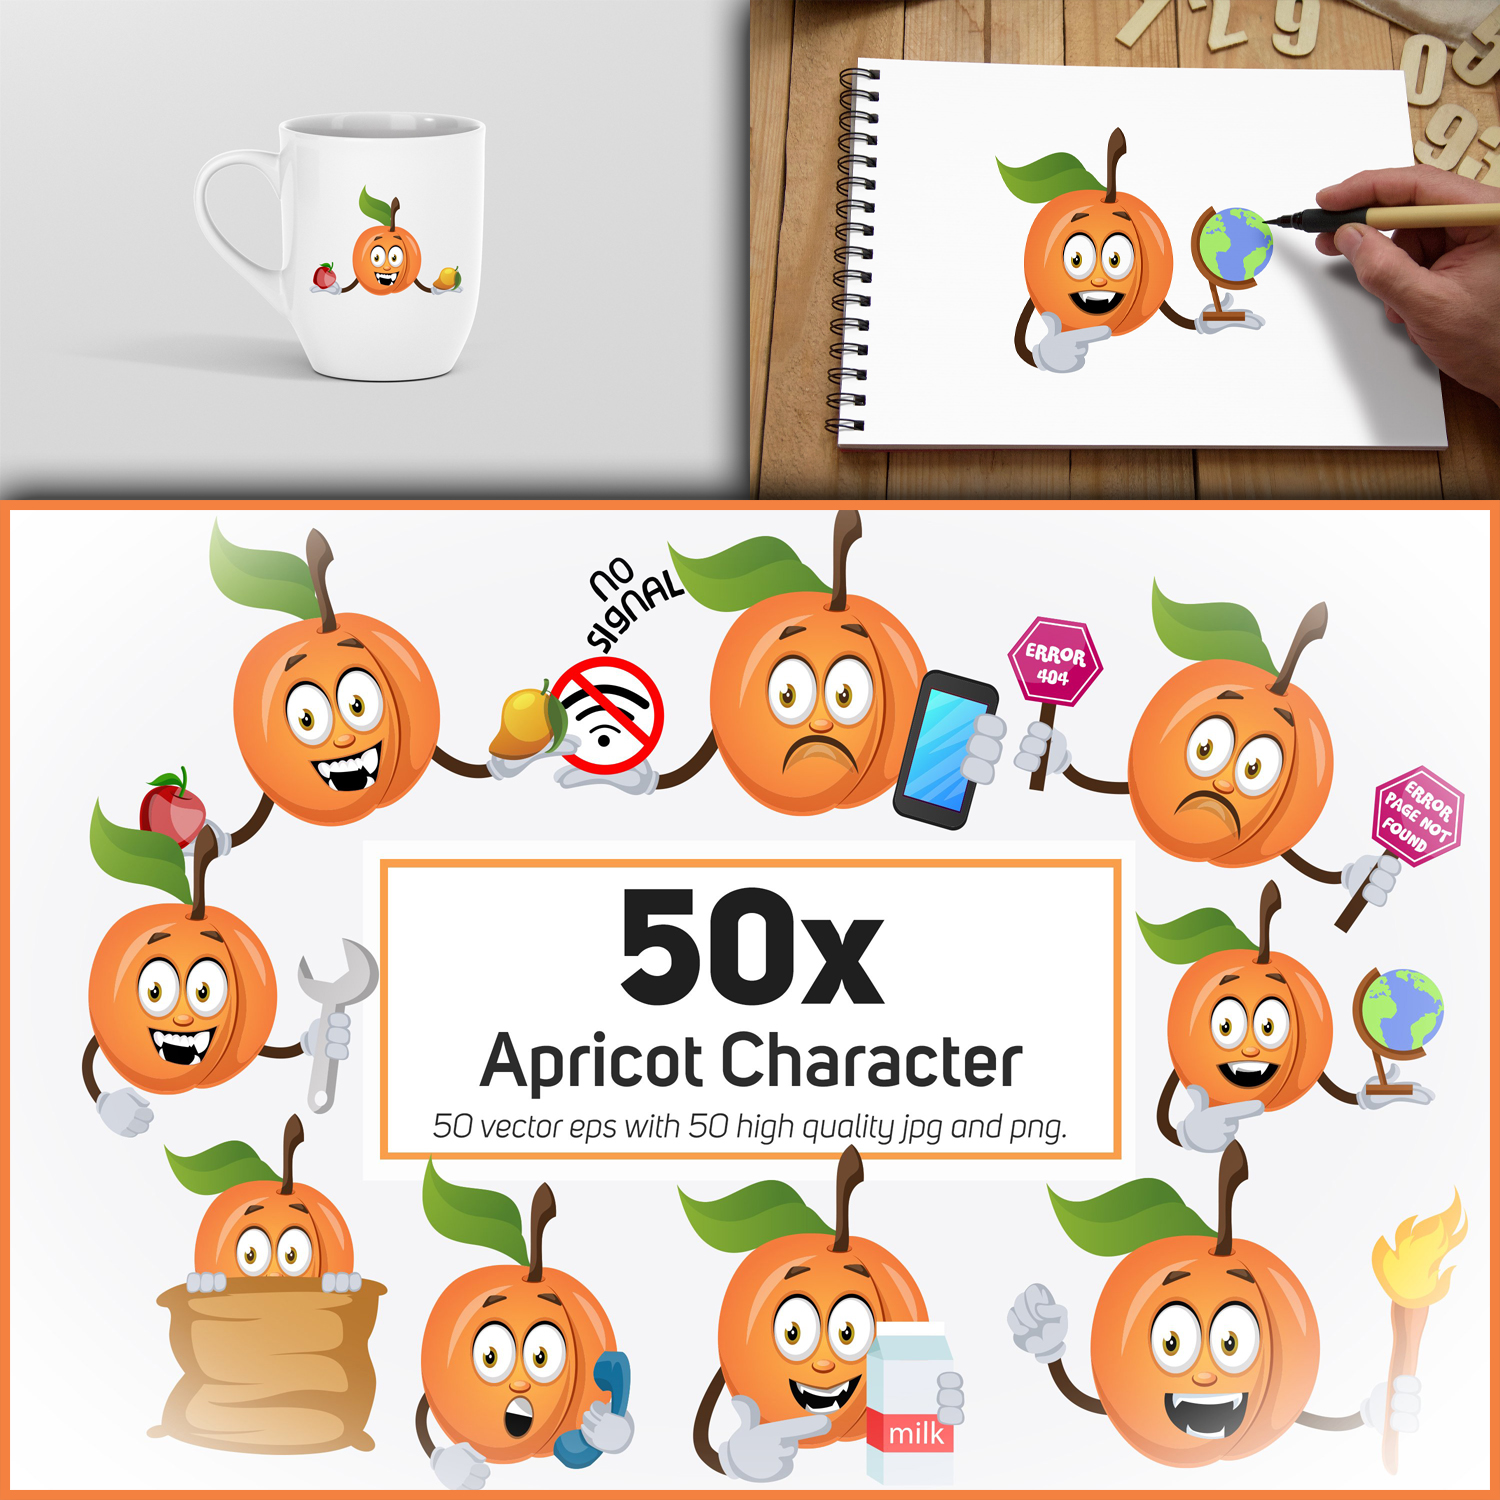 50x Apricot Character and Mascot Collection illustration.